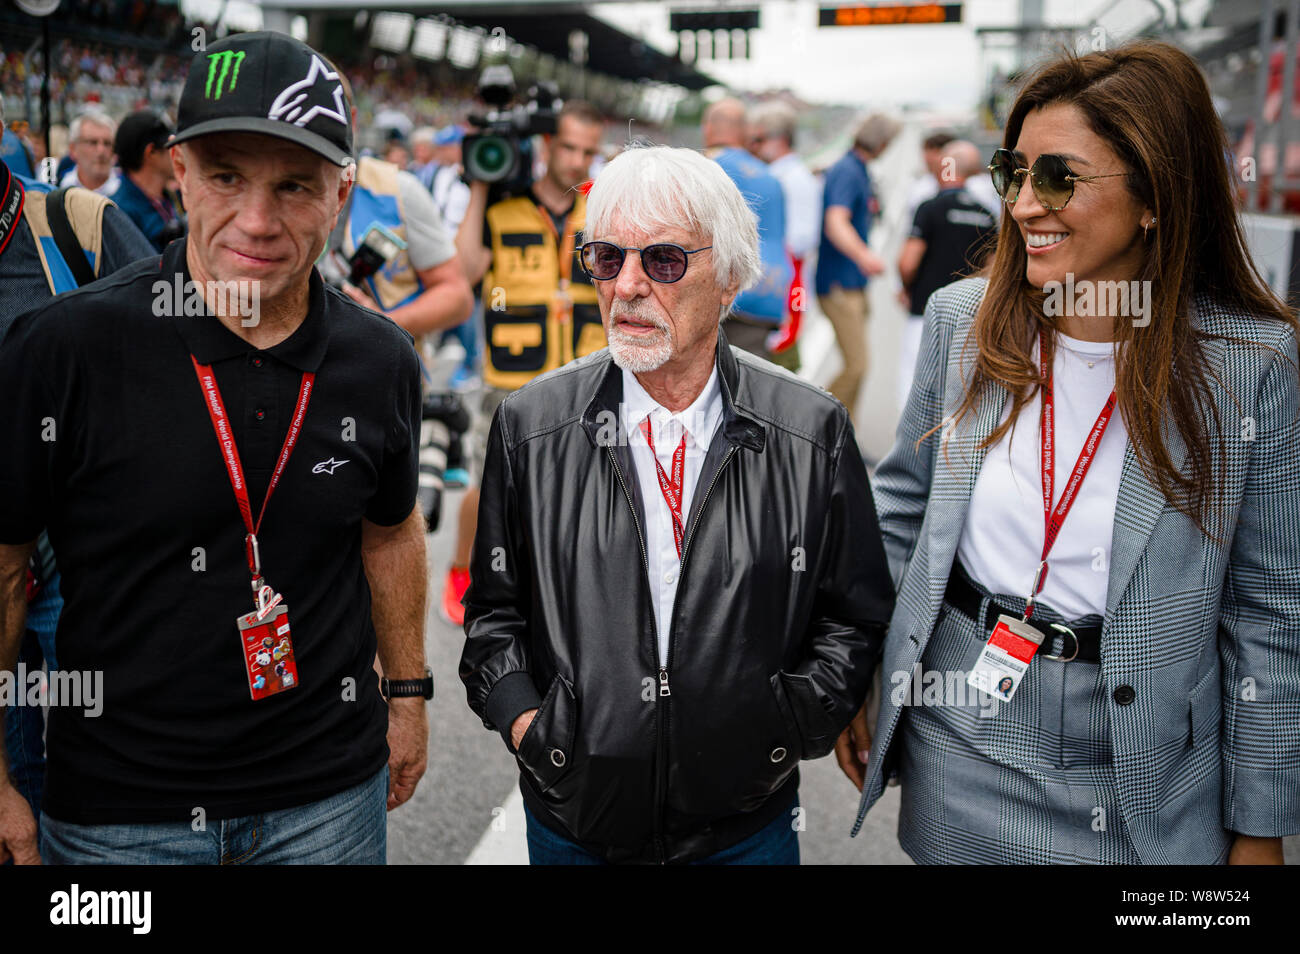 Randy Mamola (L), former American Grand Prix motorcycle racer, Bernie Ecclestone (C), Chairman Emeritus of the Formula One Group with his wife, Fabiana Flosi walk through the starting grid prior to the Austrian MotoGP Grand Prix race. Stock Photo